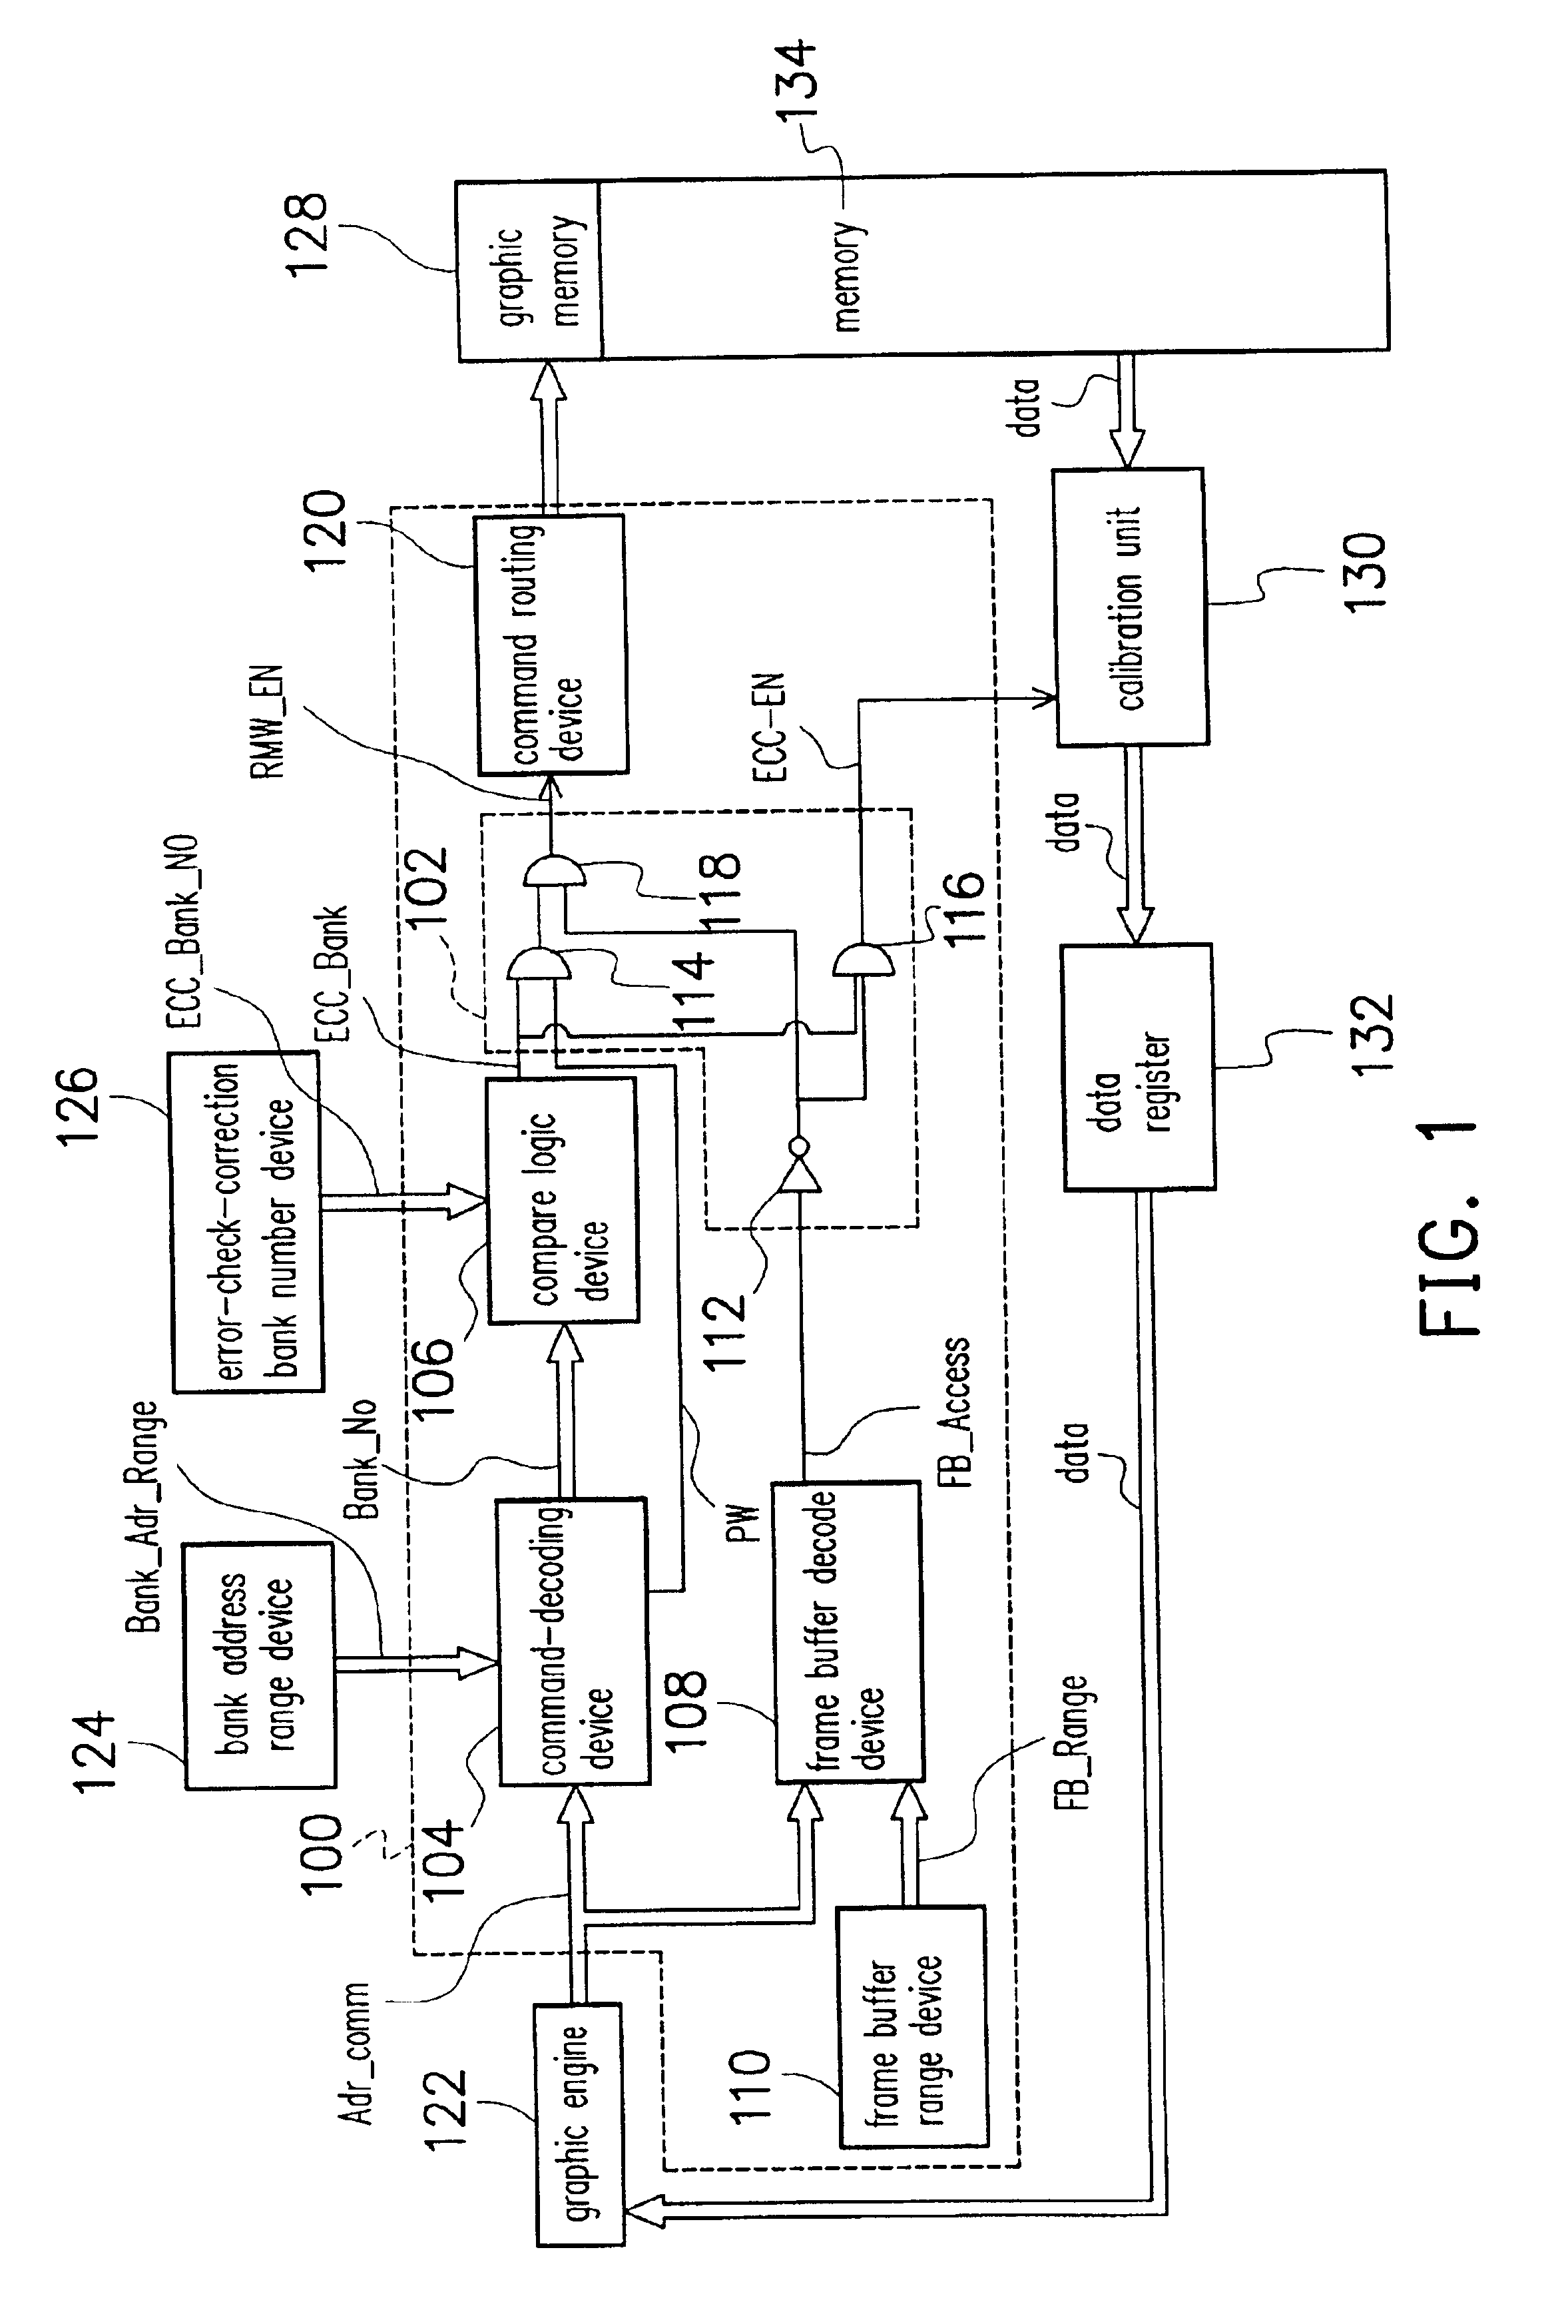 Memory control device and method